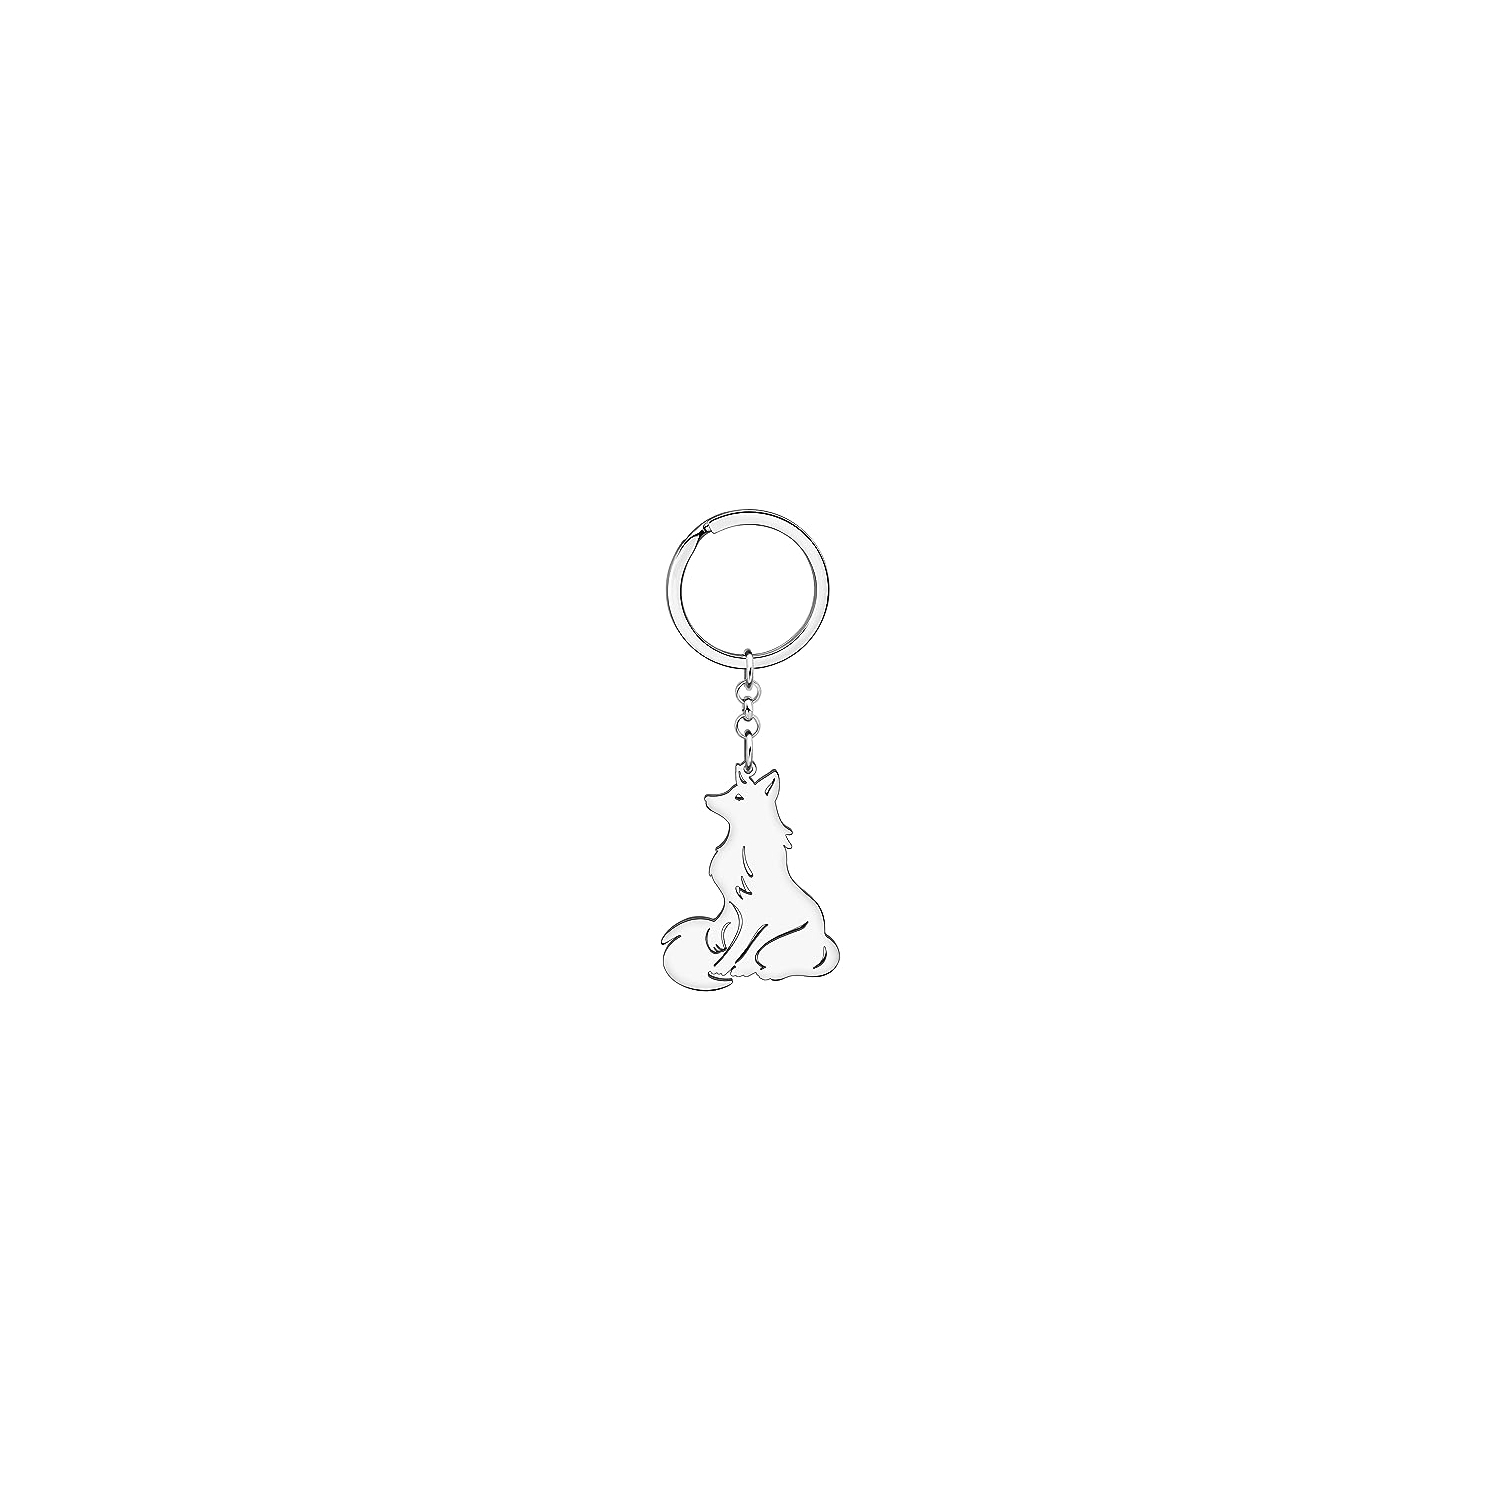 Adorable Arctic Fox Stainless Steel Keychain - Fun Gift for Women and Girls, Silver Plated Animal Jewelry Accessory for Handbags and Wallets